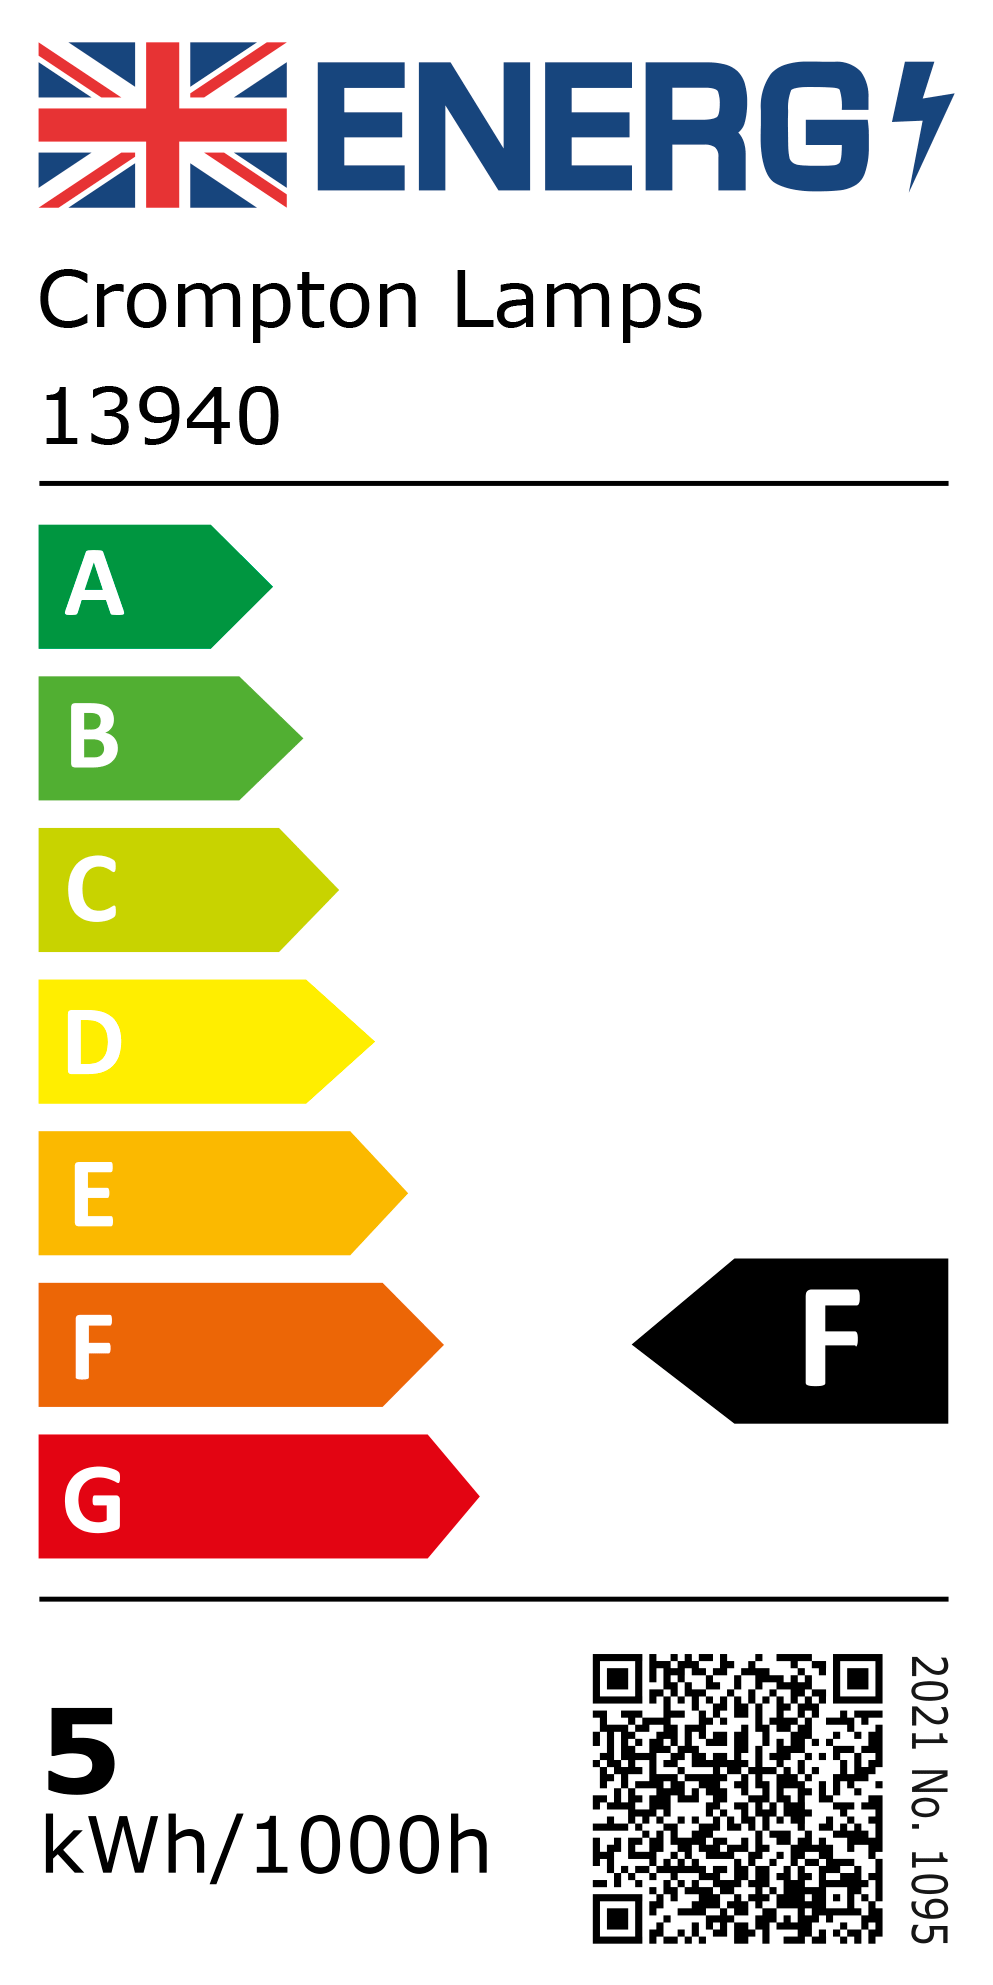 New 2021 Energy Rating Label: Stock Code 13940